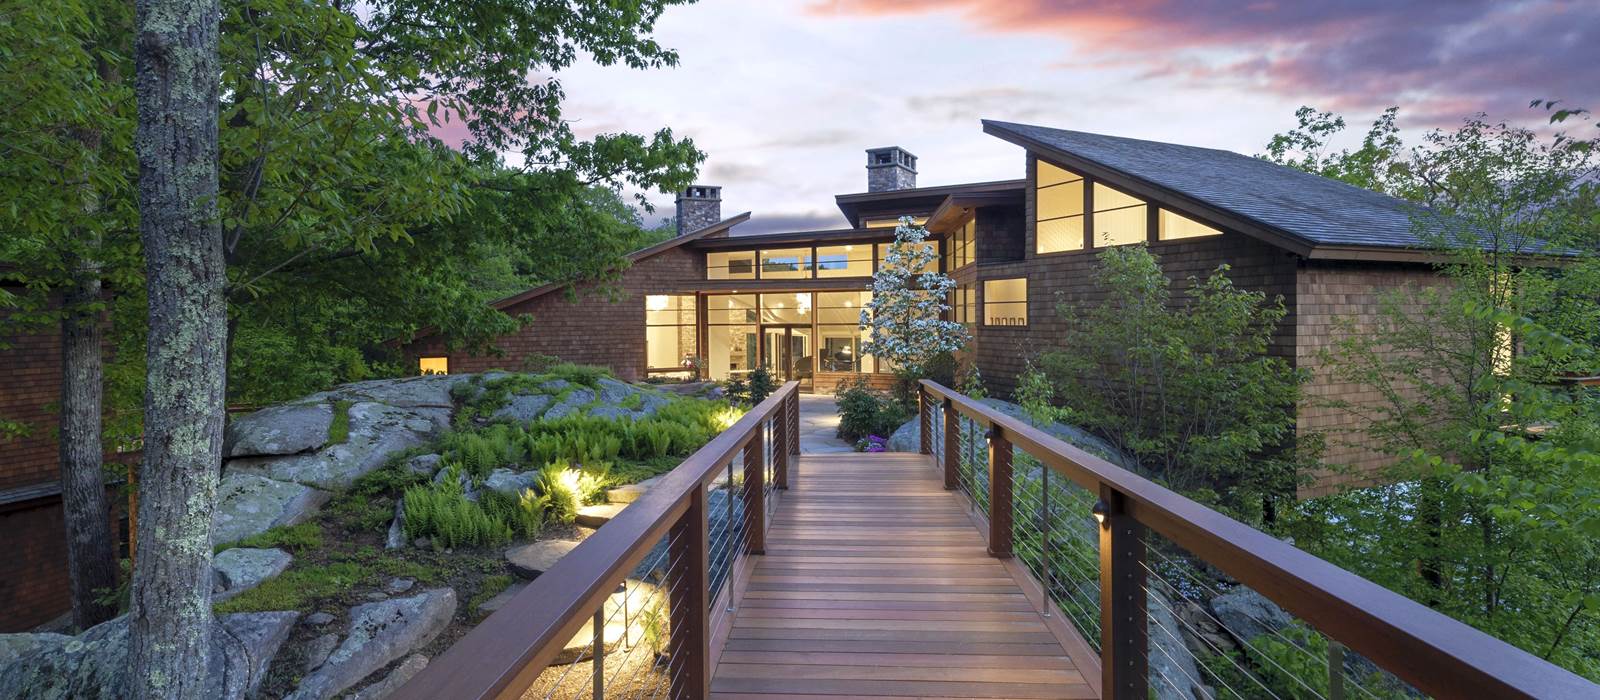 Modern Lake House - The Approach at Dusk